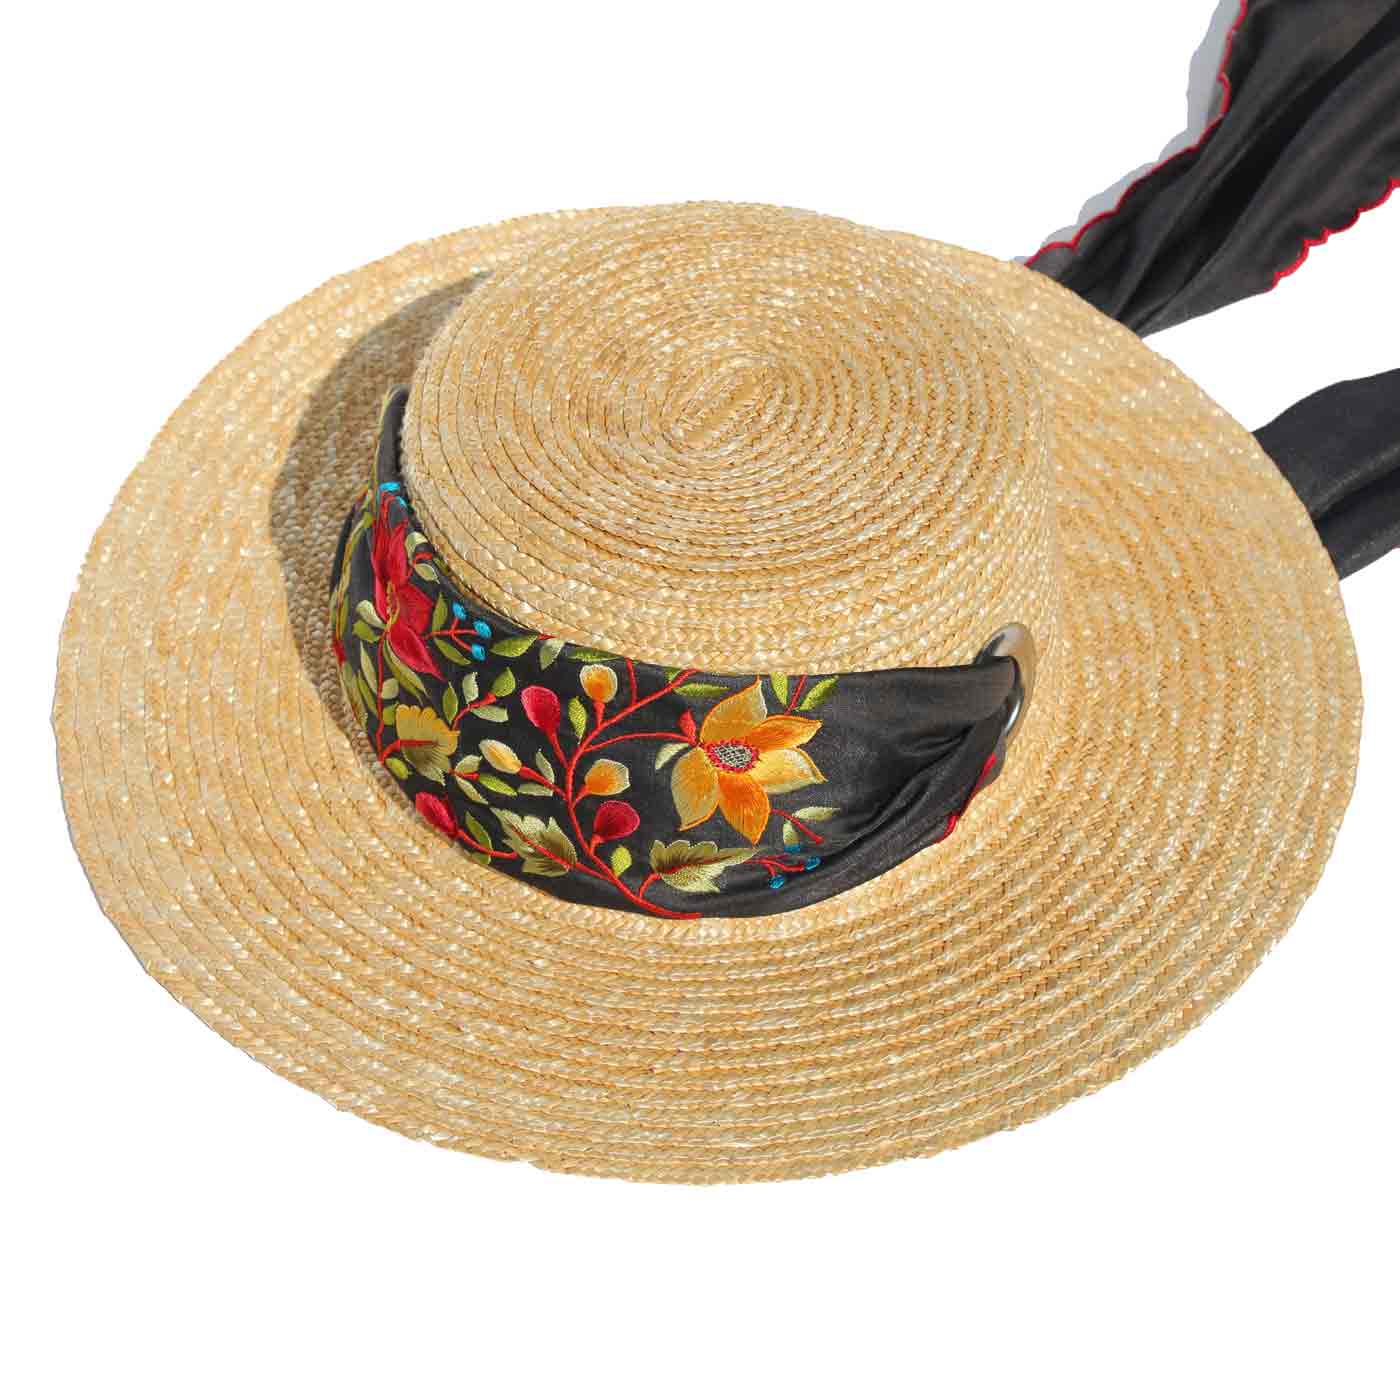 Straw Boater Hat with Scarf